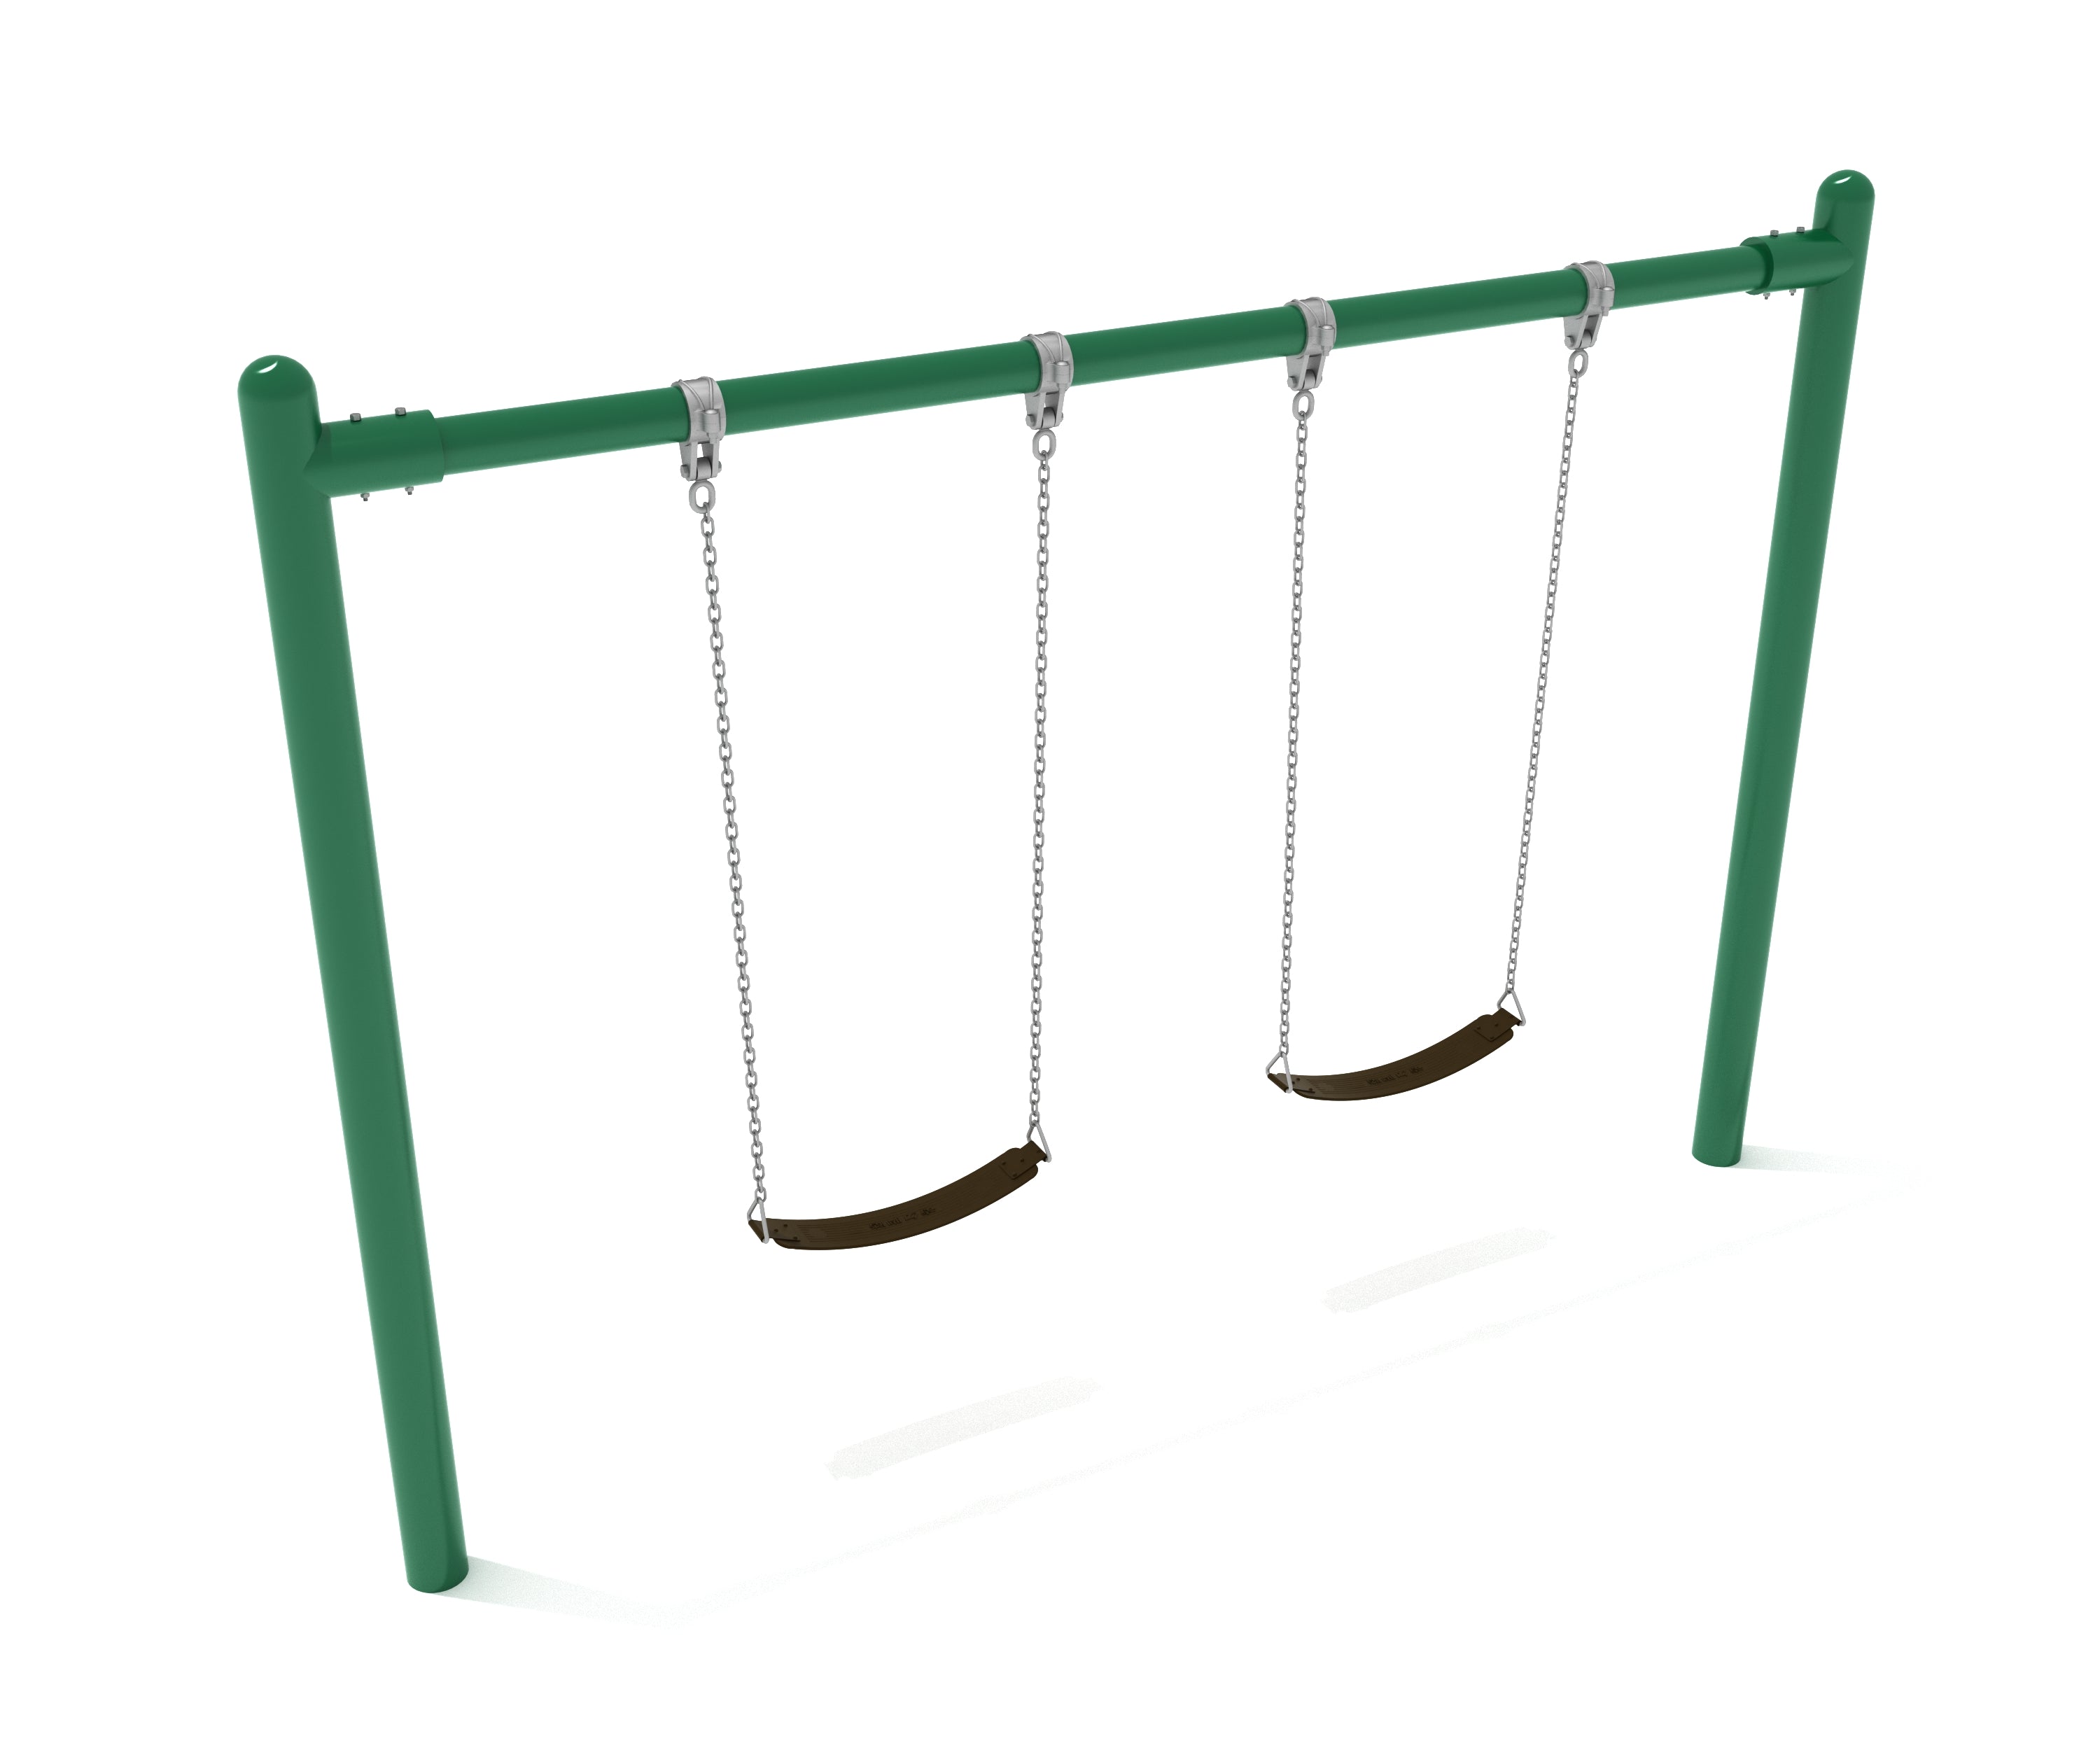 Swing Sets: Made in USA